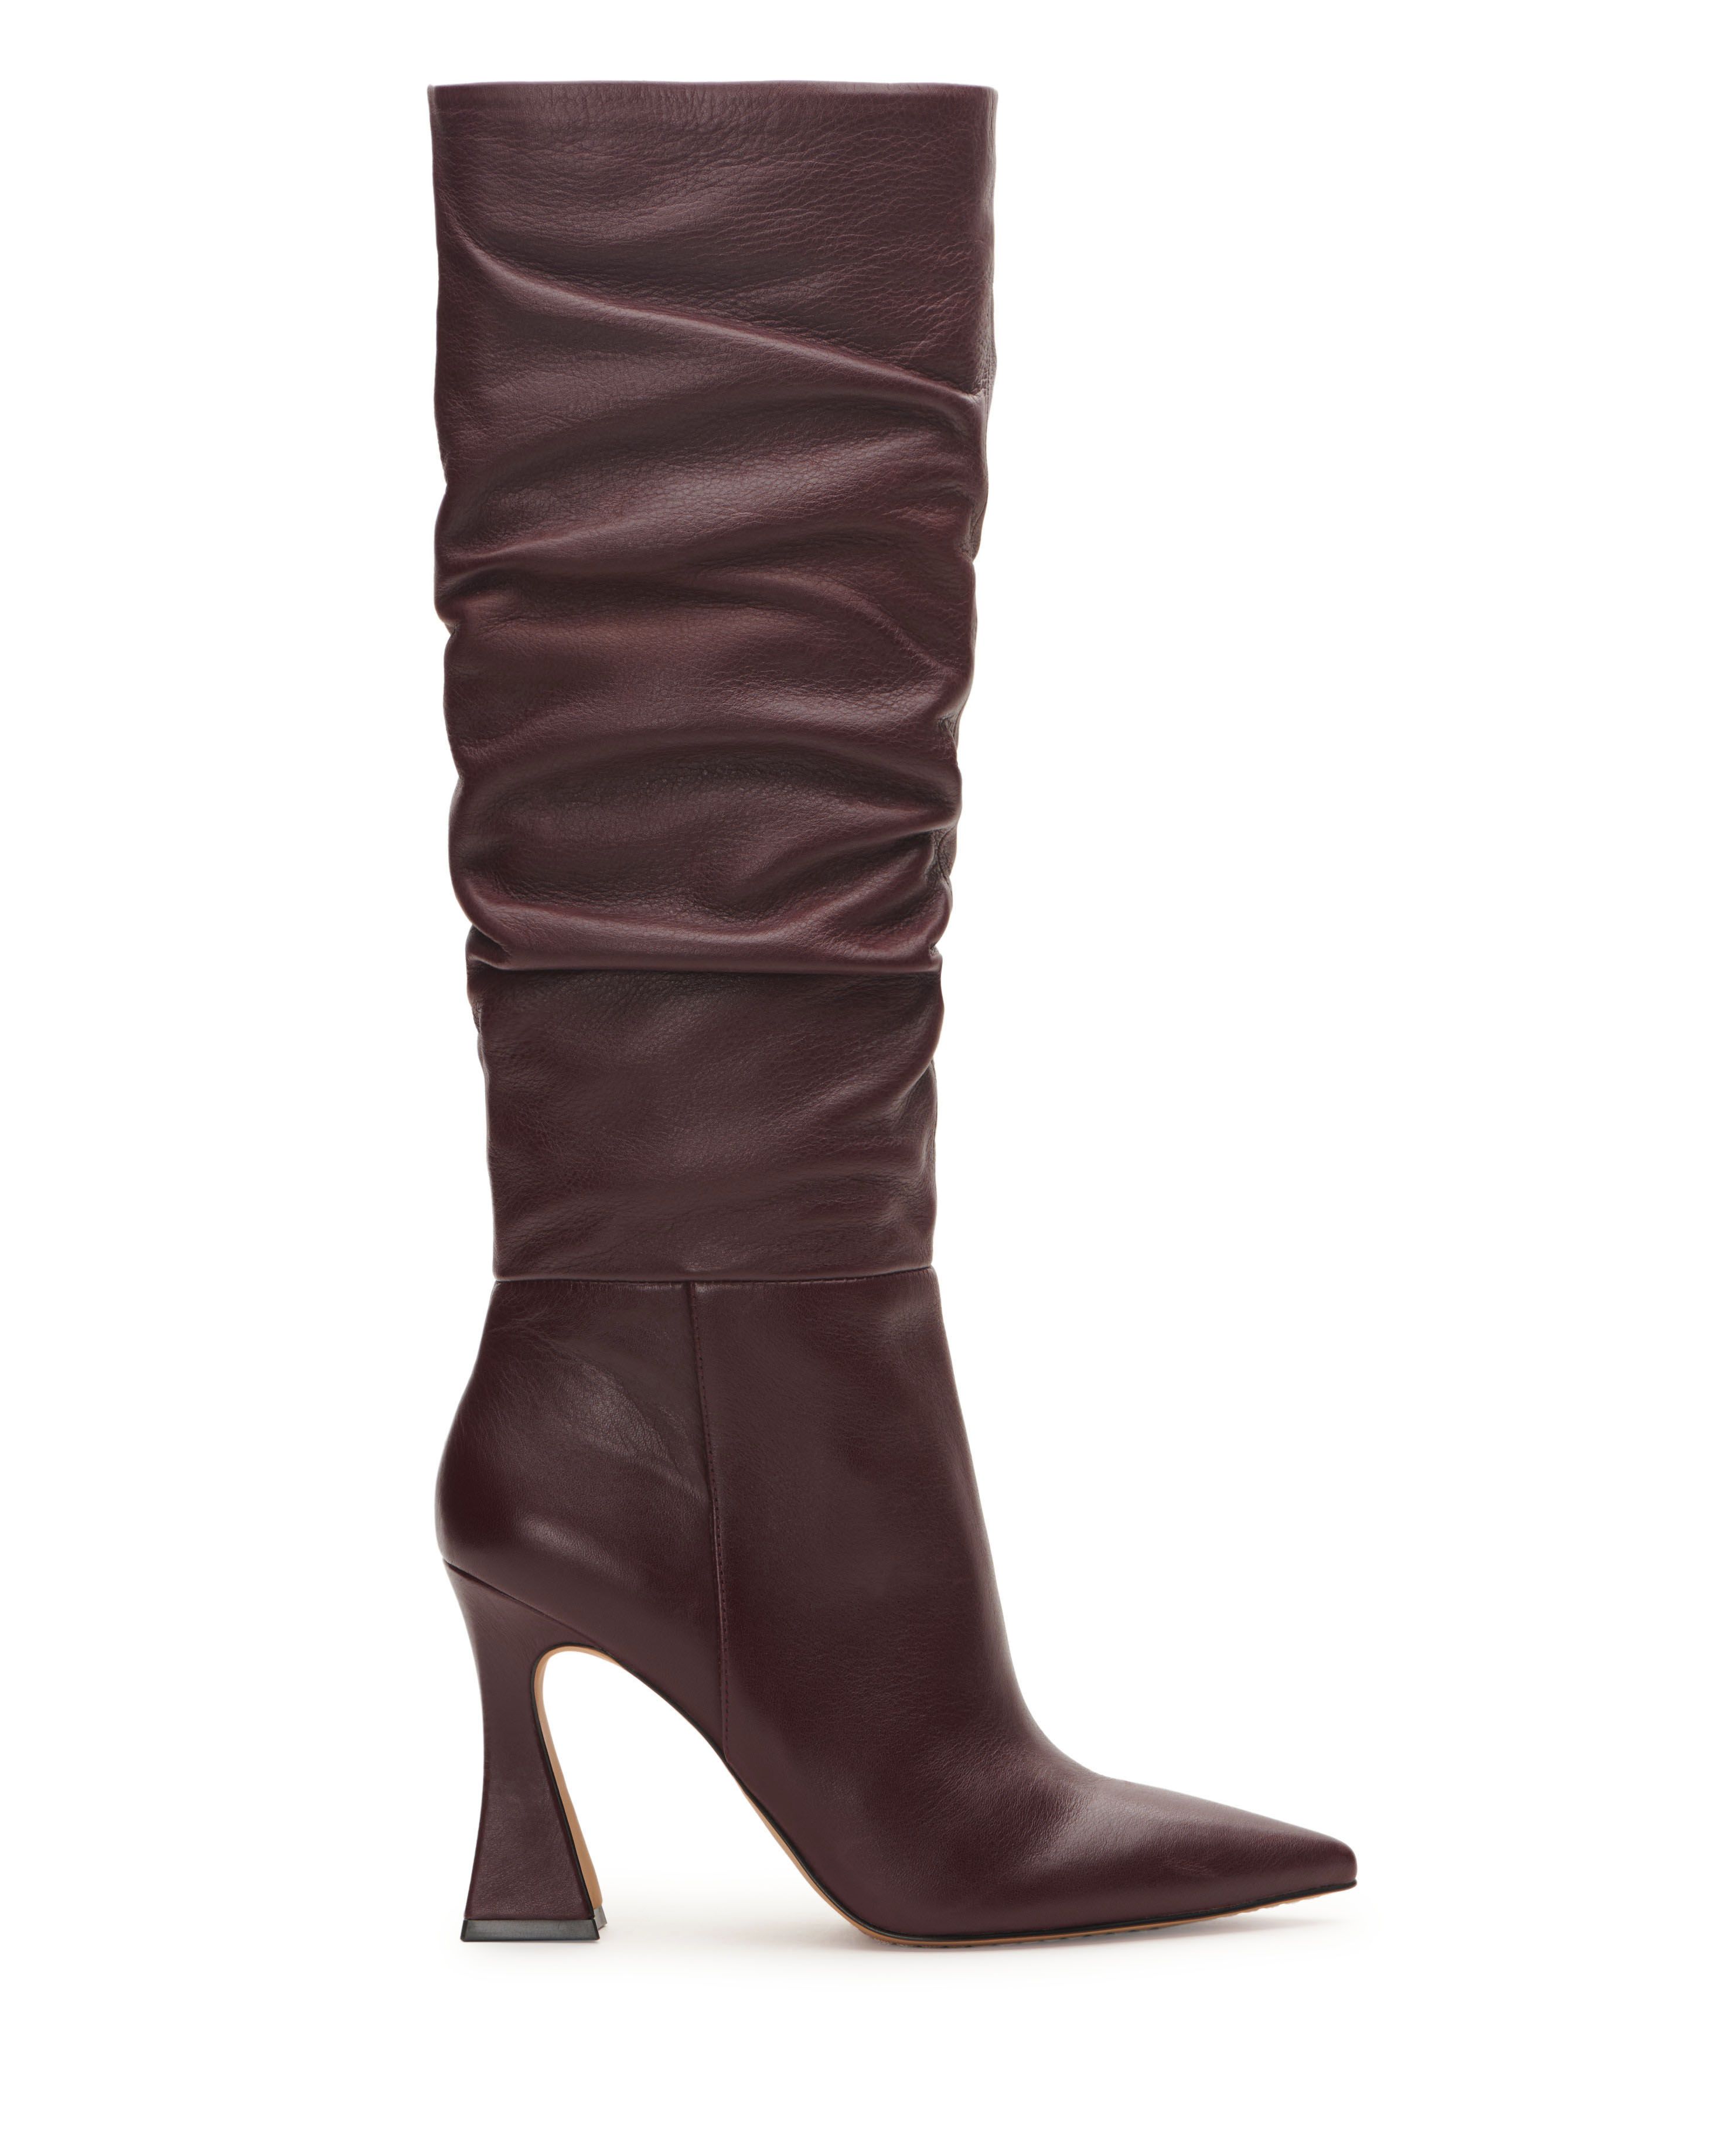 Vince Camuto Alinkay Boot | Vince Camuto